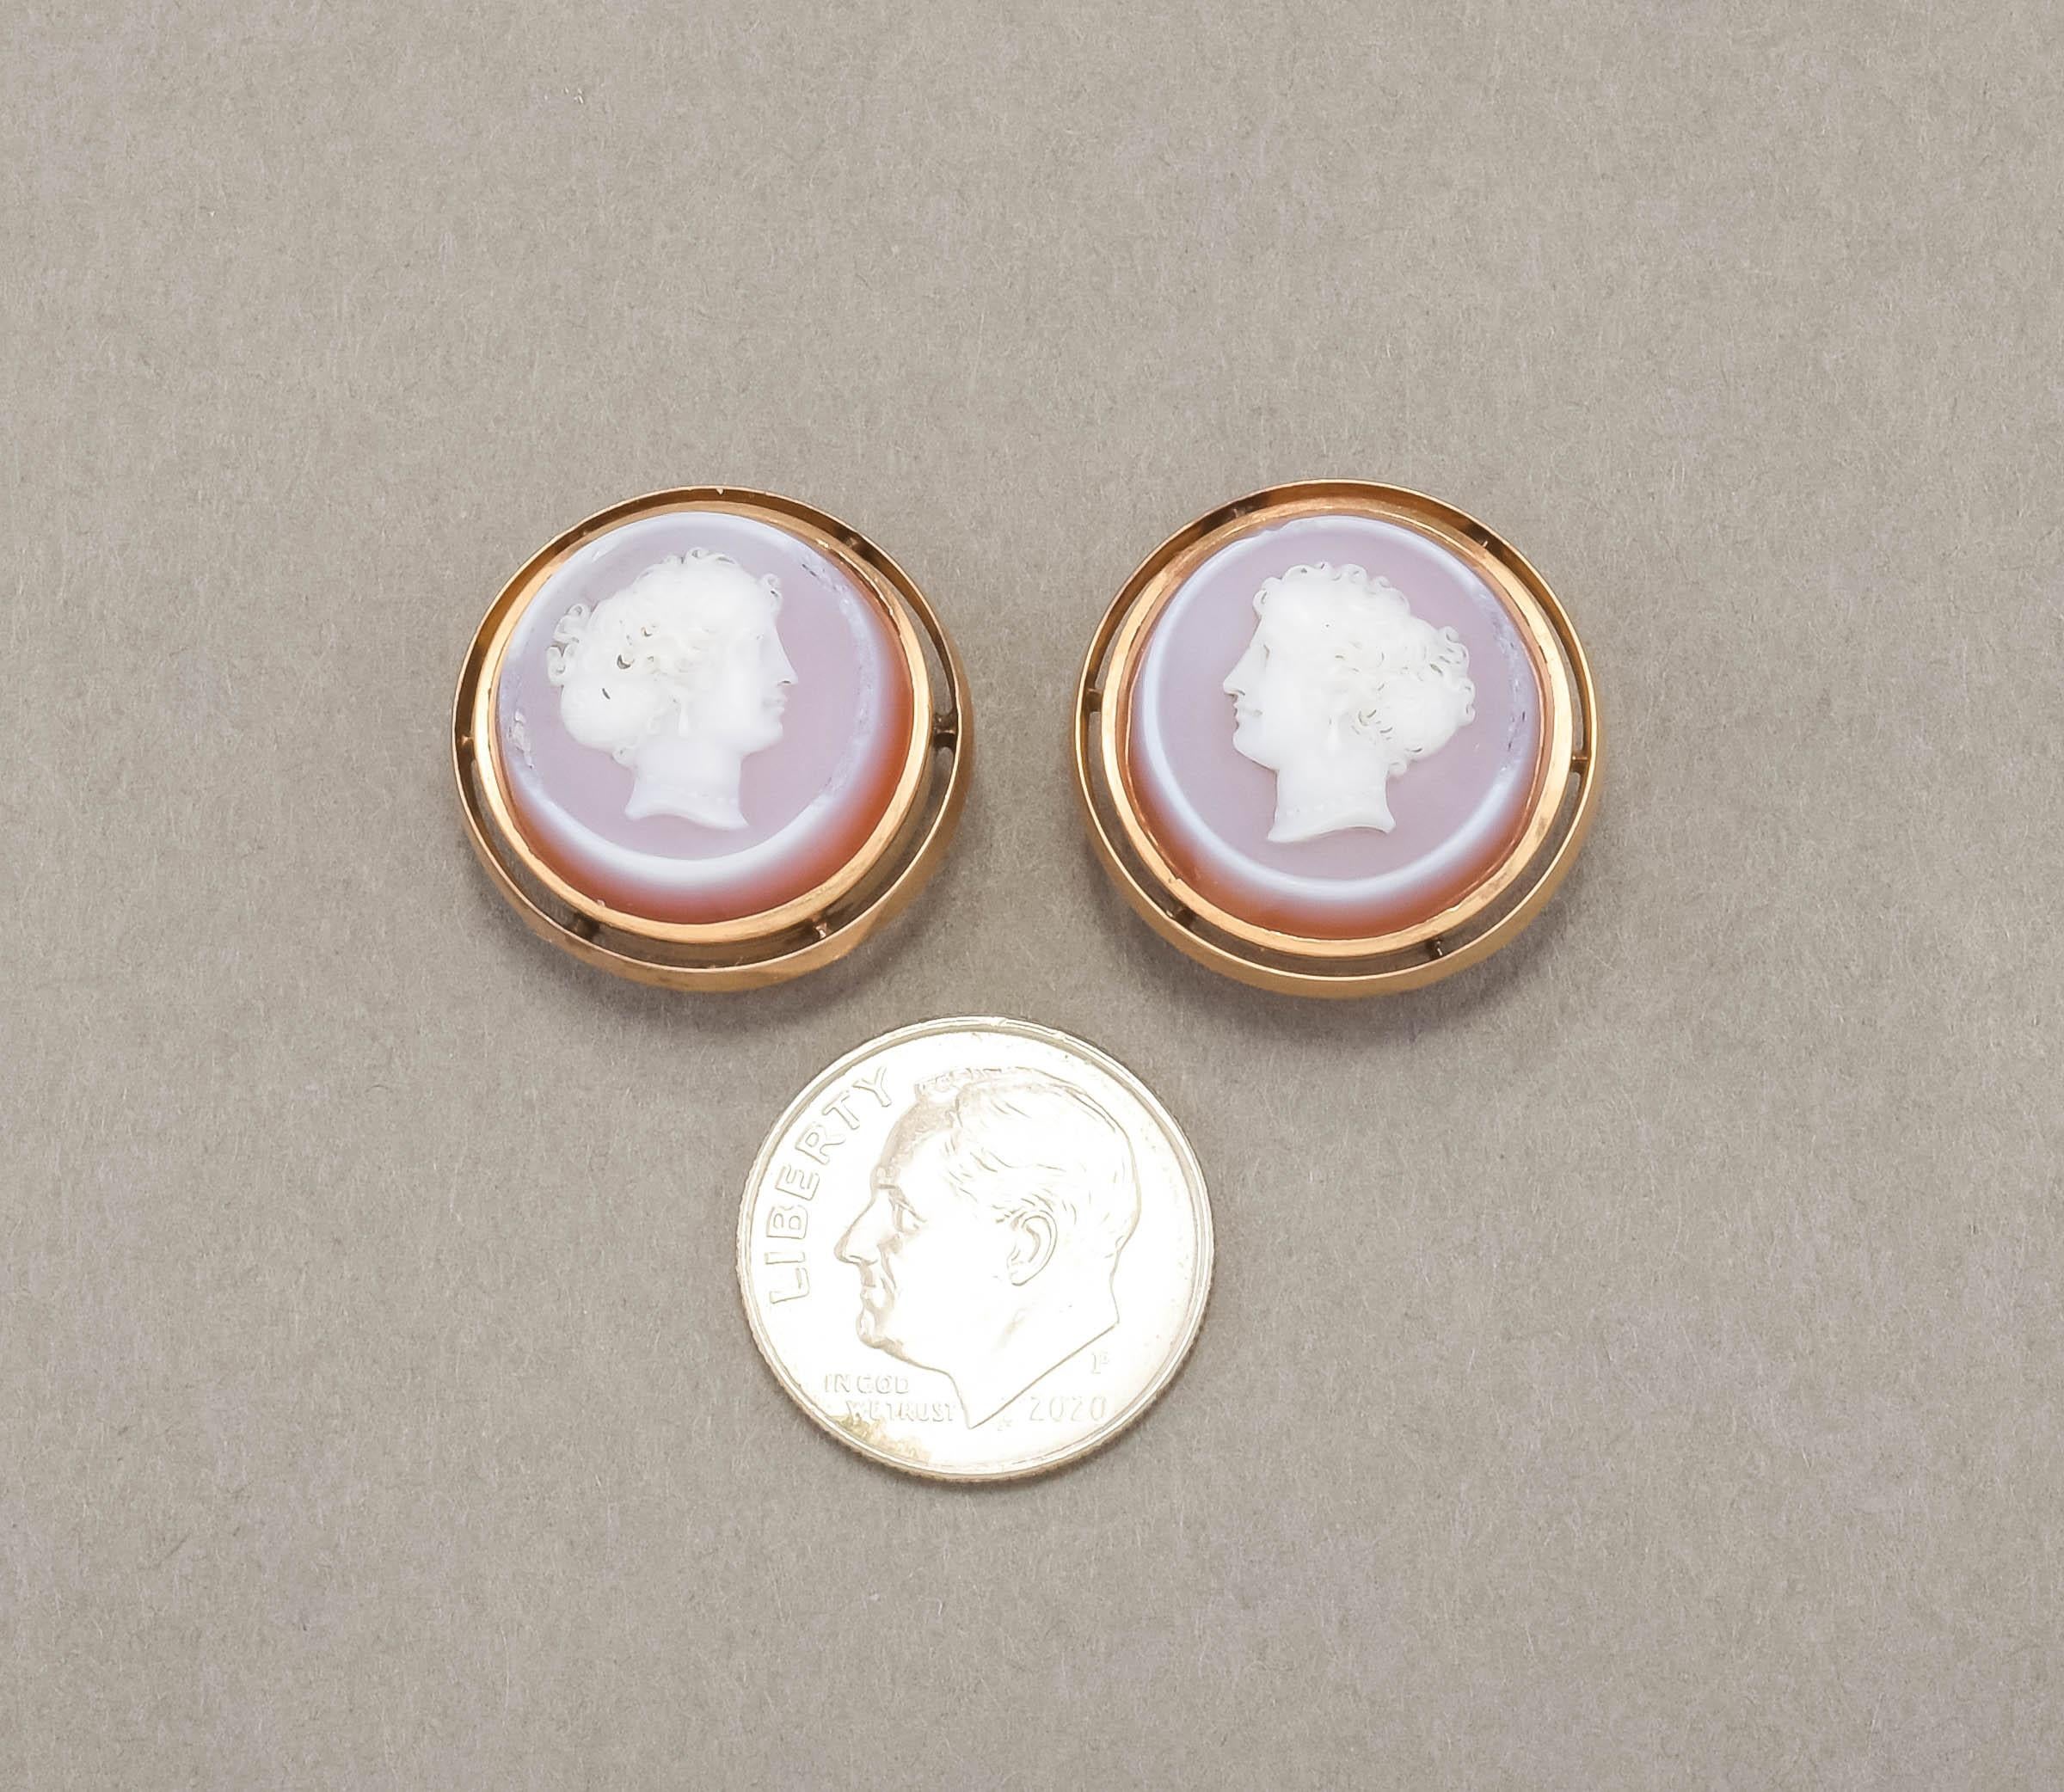 Offered is an elegant pair of Victorian hand carved cameo cufflinks or buttons, estimated to date to 1870 or so.  Set in rosy yellow 14K gold, each backing has a hand engraved monogram of 